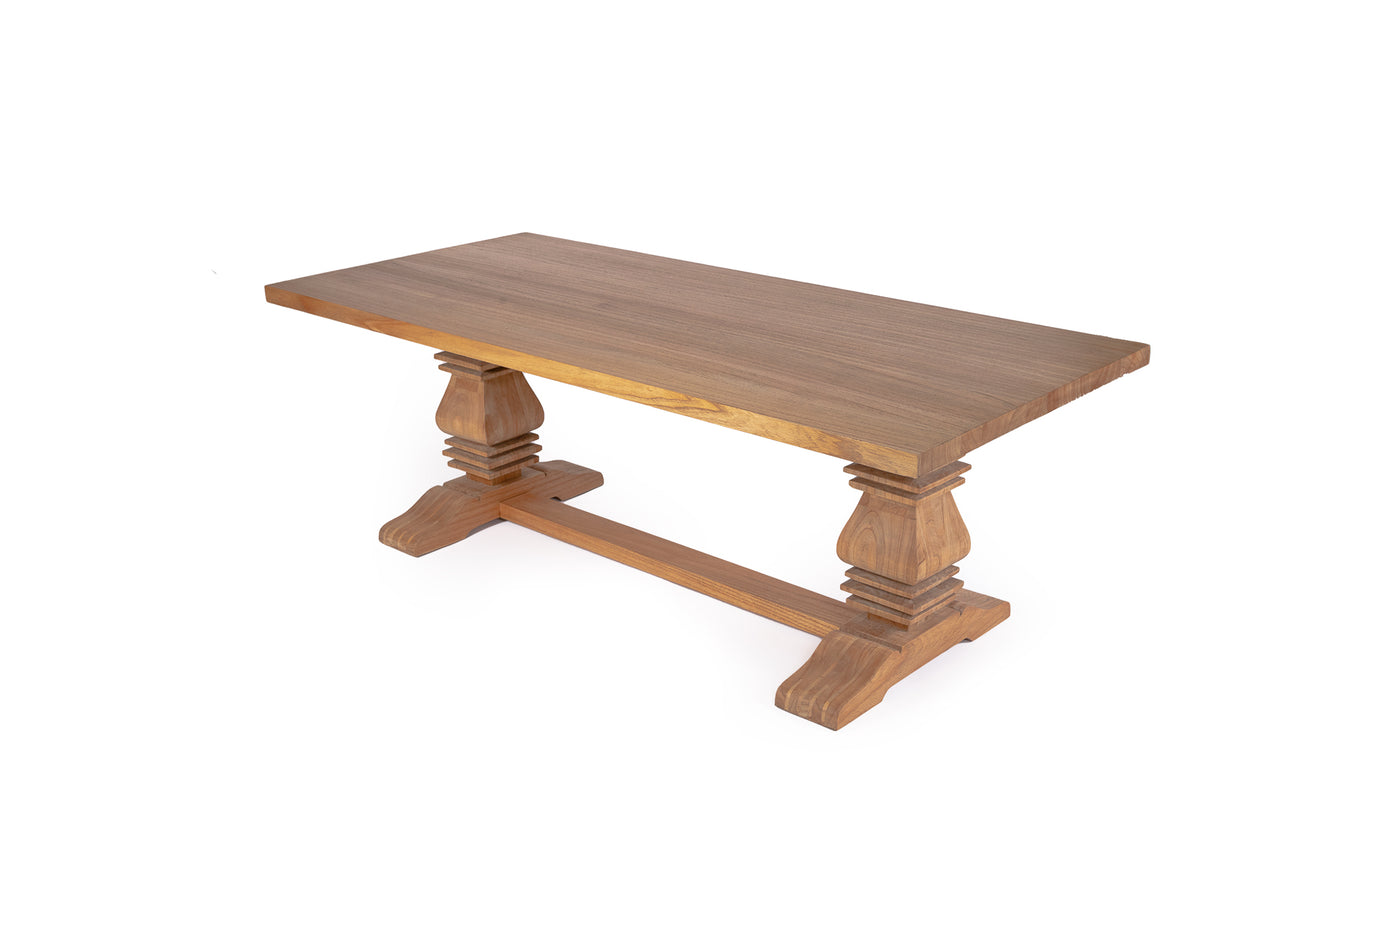 Clearwater Pedestal Table - 350cm